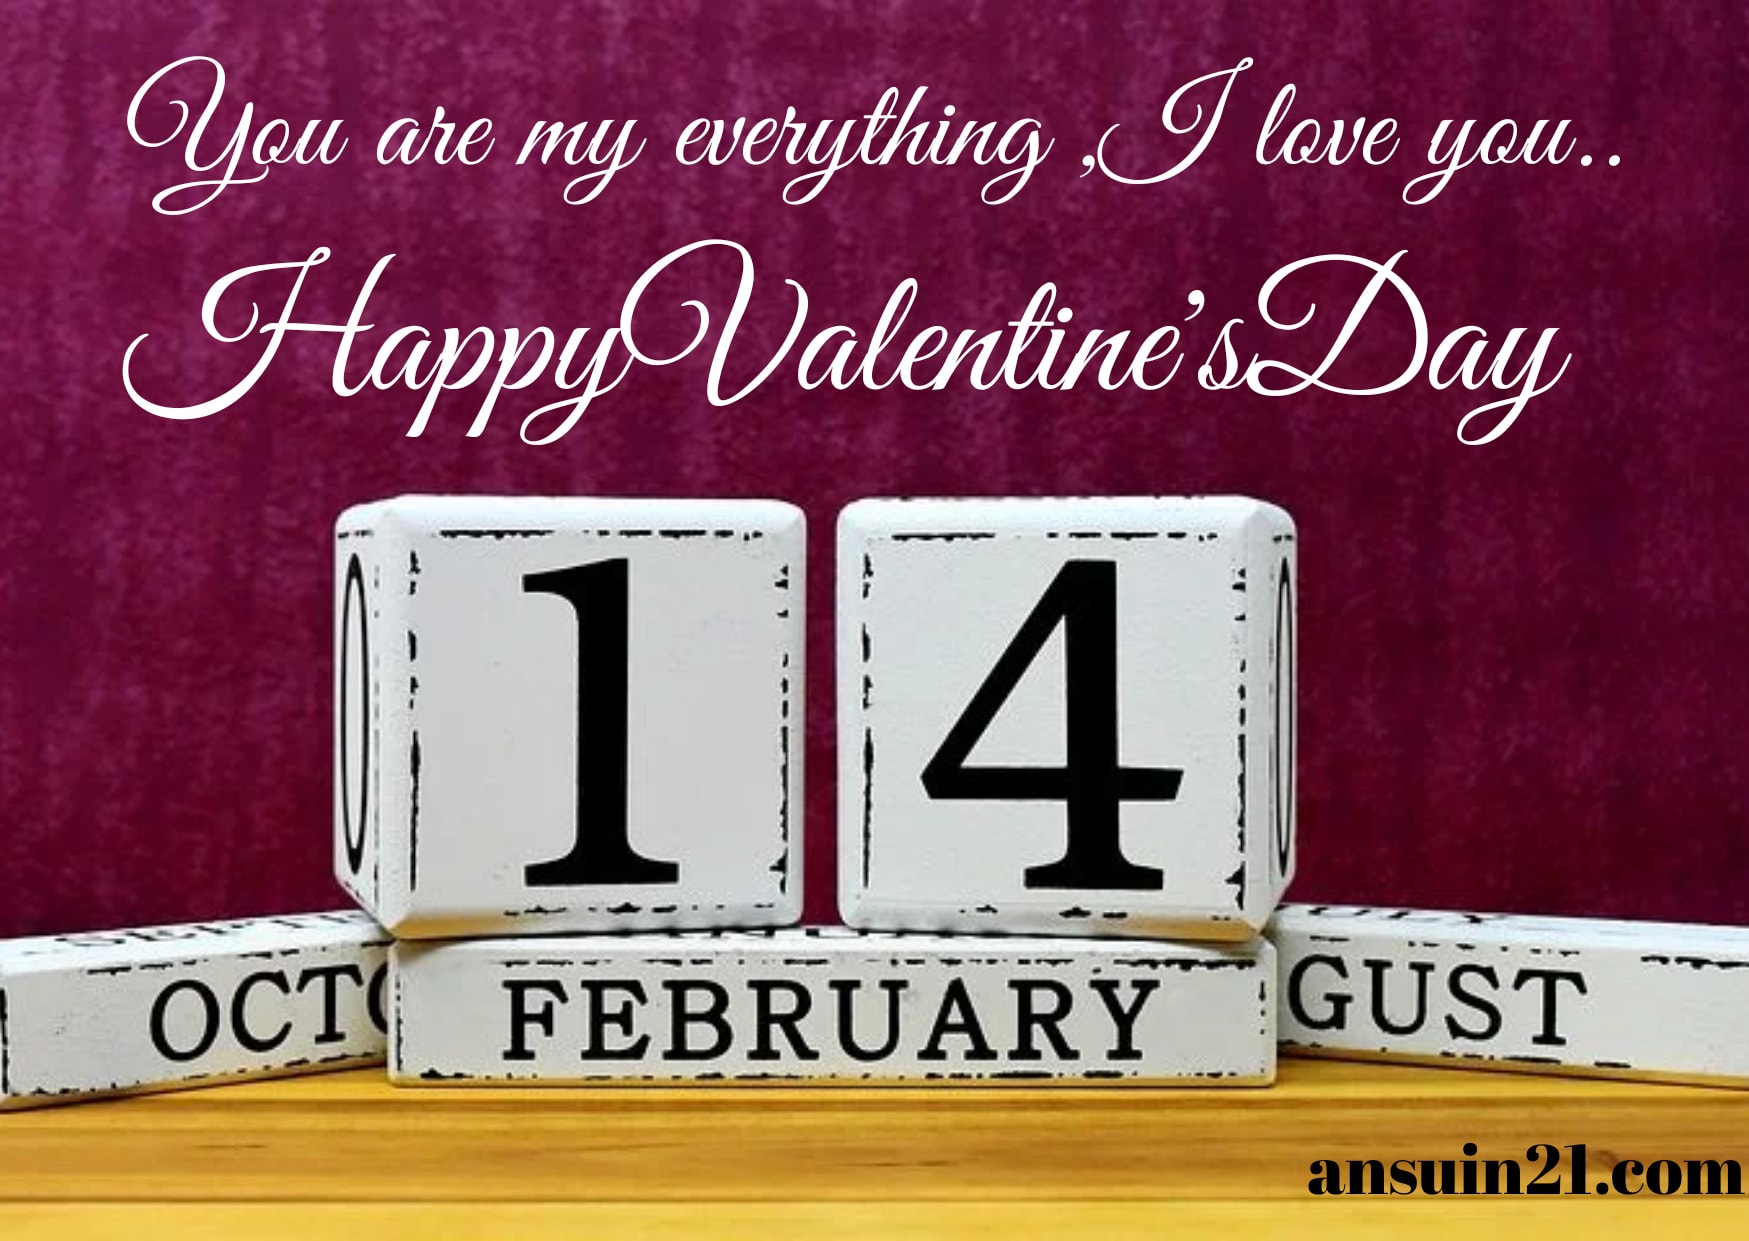 Best Happy Valentine's Day Wishes, Images & Quotes